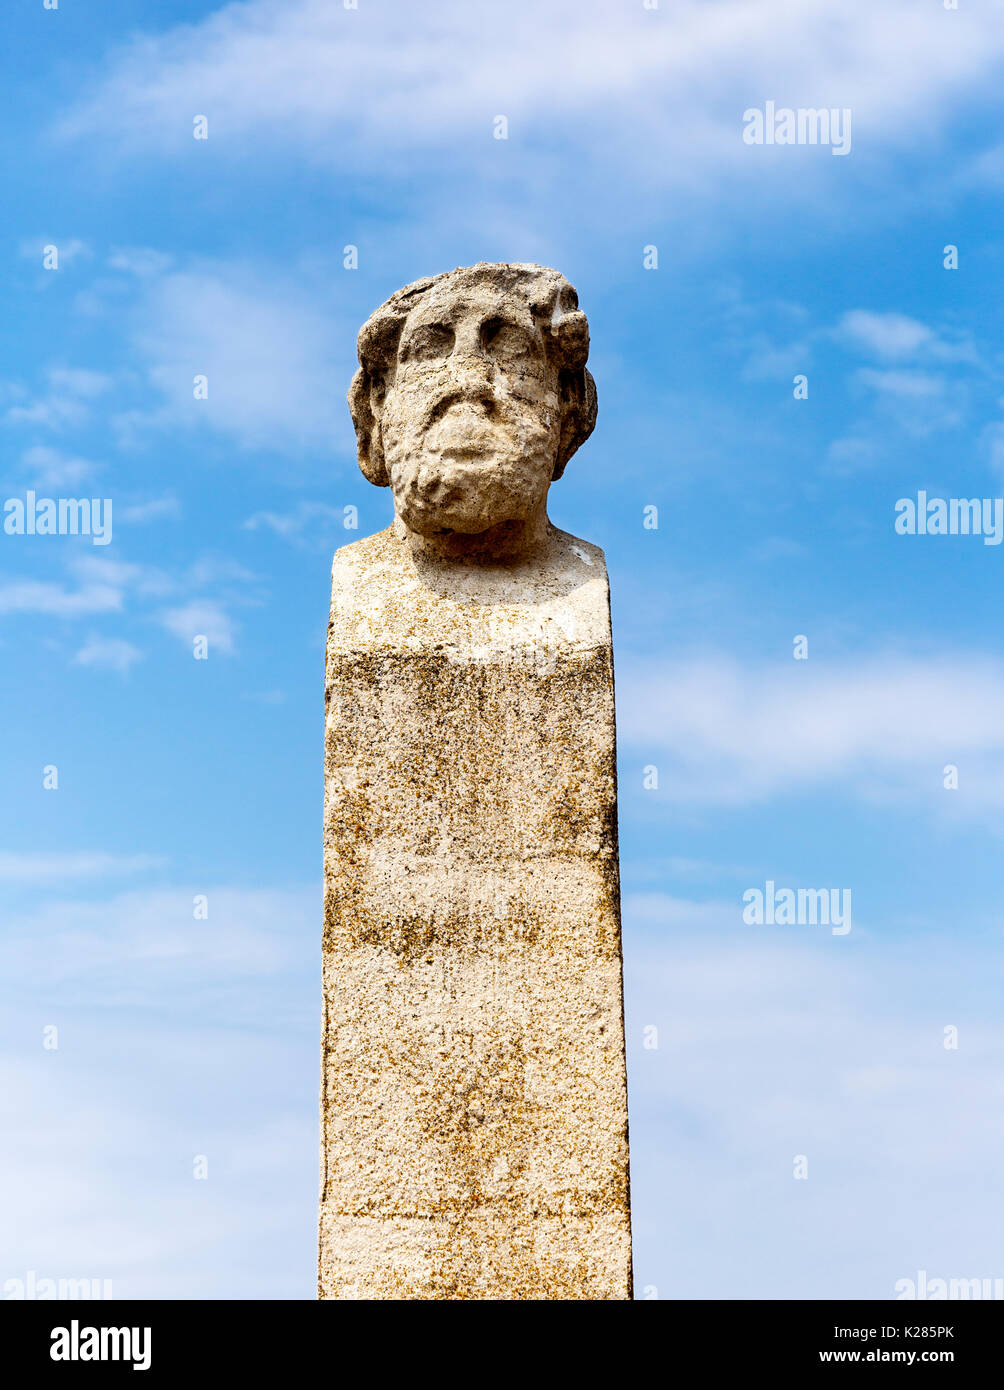 Weathered marble column with a head at the top amid the archaeological ruins, Delos, Greece Stock Photo